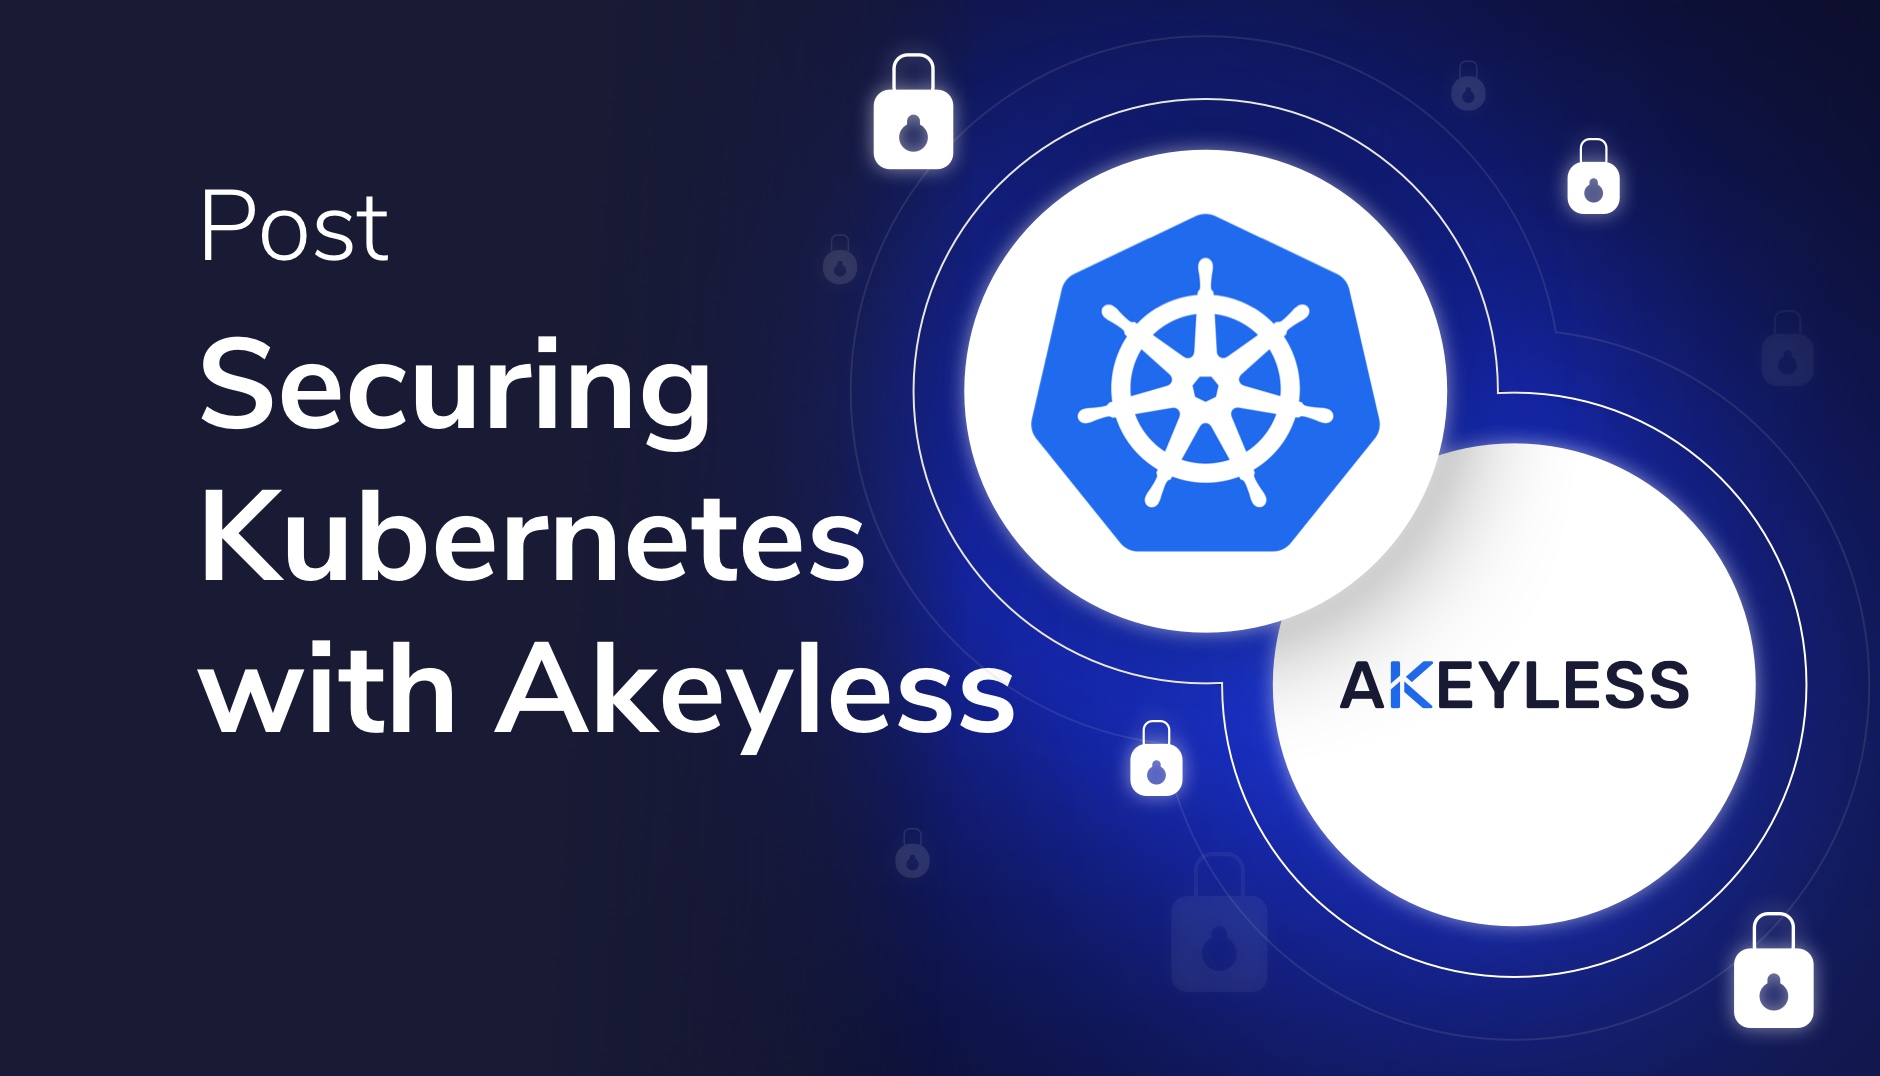 Secure Your Kubernetes with Akeyless Secrets Orchestration